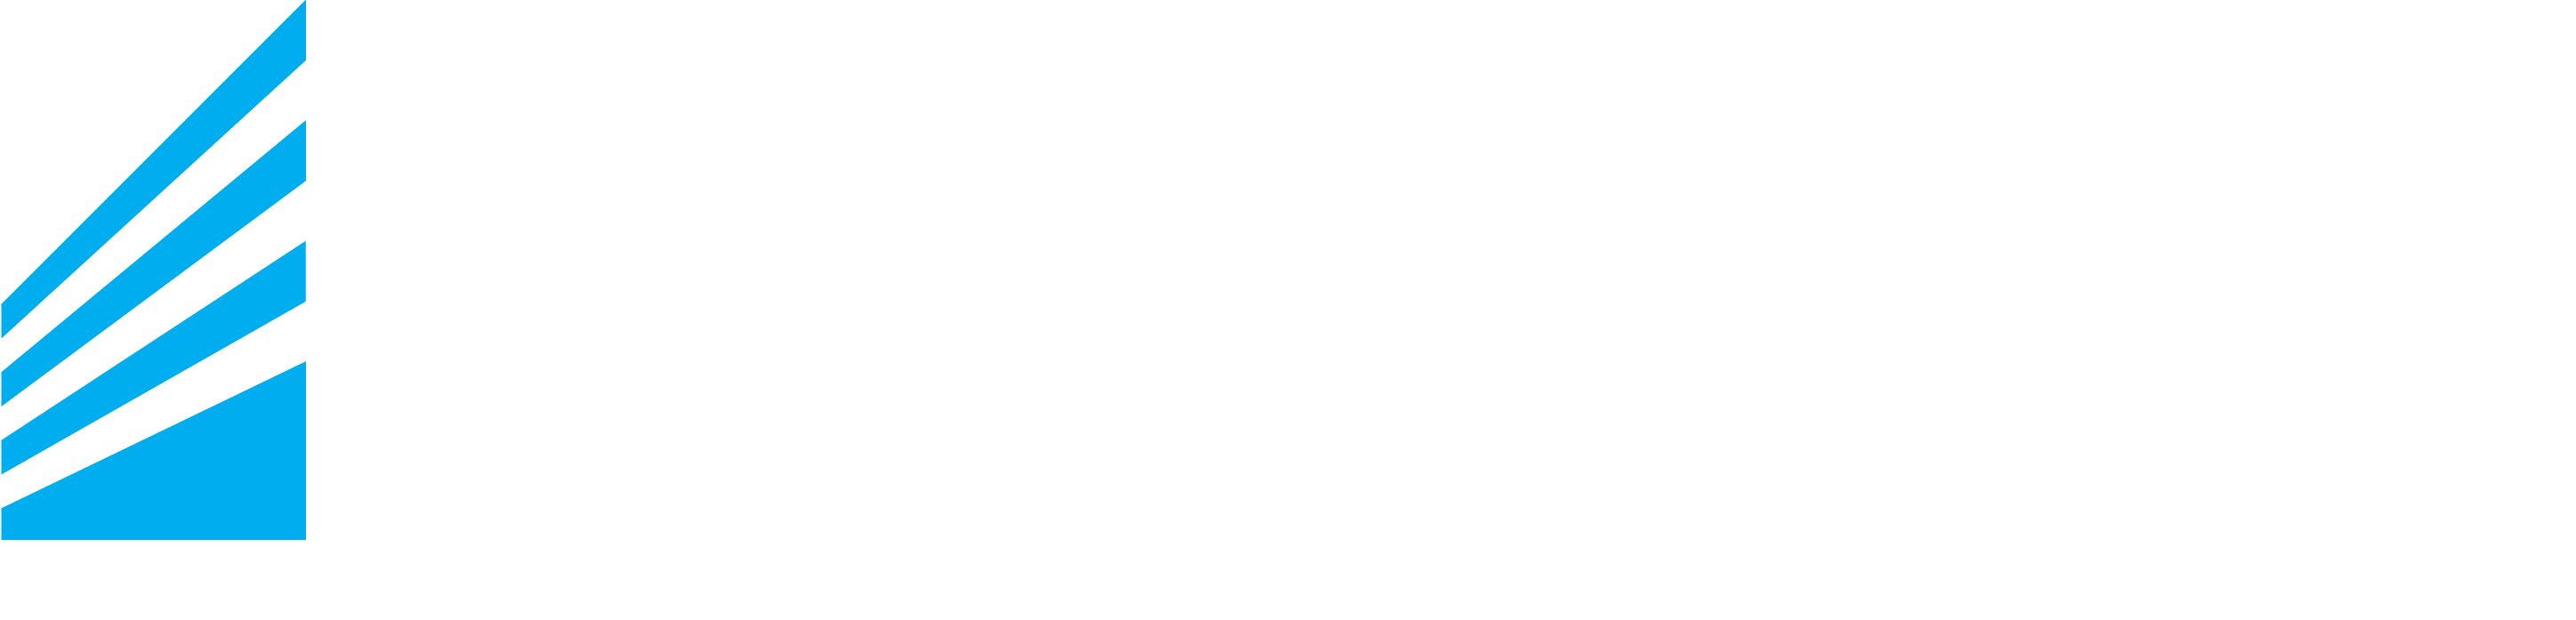 Maher Commercial